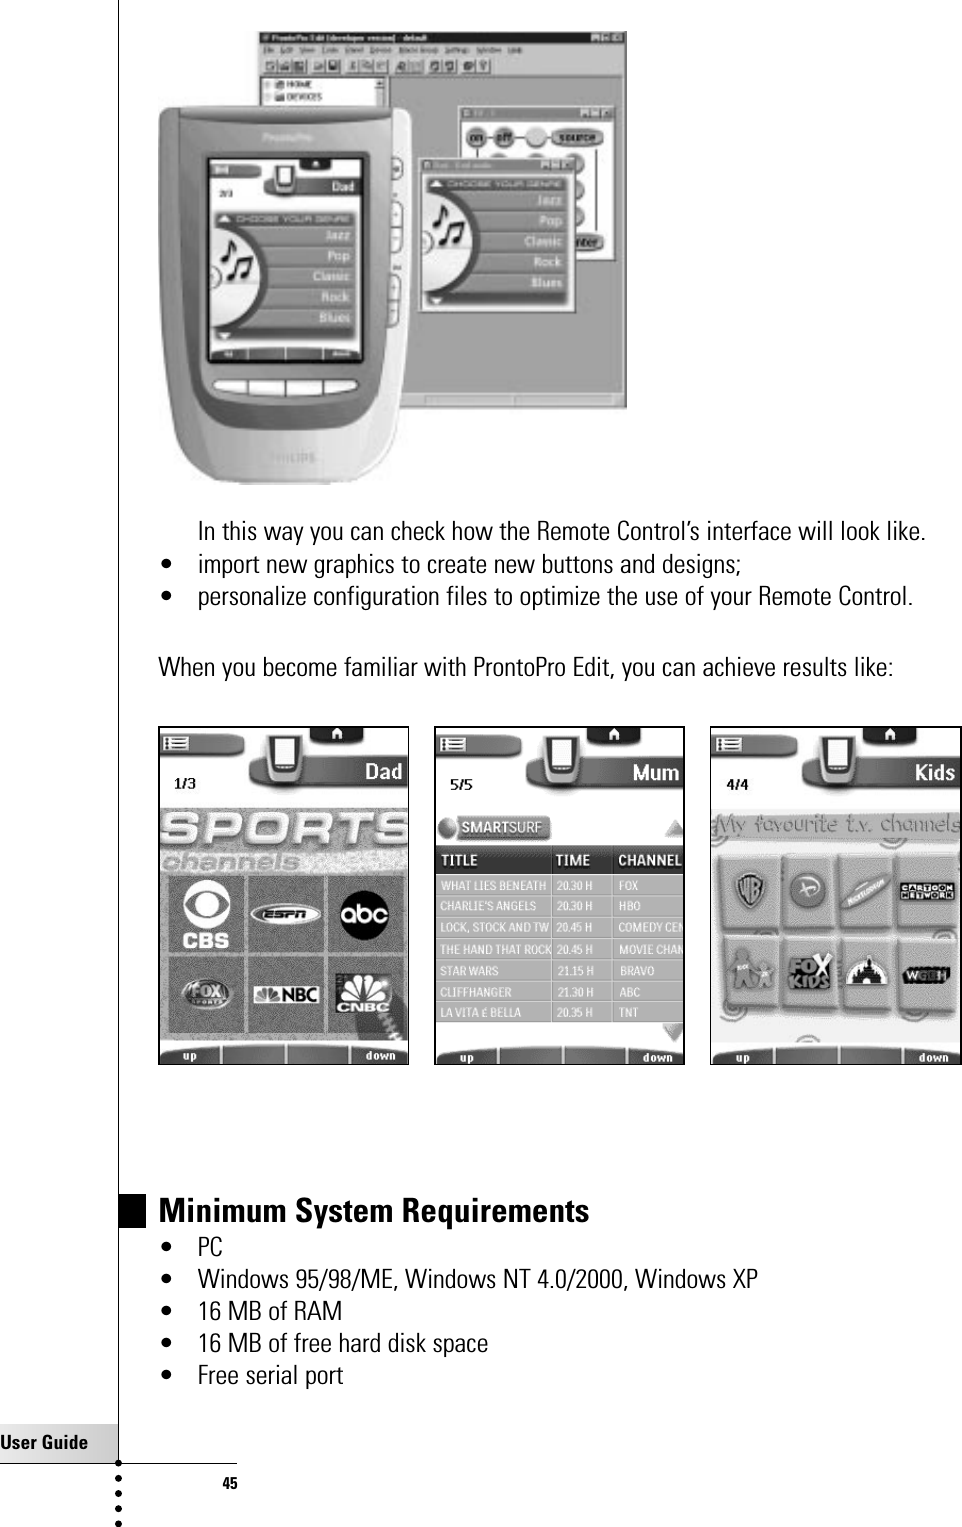 User Guide45In this way you can check how the Remote Control’s interface will look like.• import new graphics to create new buttons and designs;• personalize configuration files to optimize the use of your Remote Control.When you become familiar with ProntoPro Edit, you can achieve results like:Getting the Maximum out of itMinimum System Requirements•PC• Windows 95/98/ME, Windows NT 4.0/2000, Windows XP• 16 MB of RAM• 16 MB of free hard disk space• Free serial port